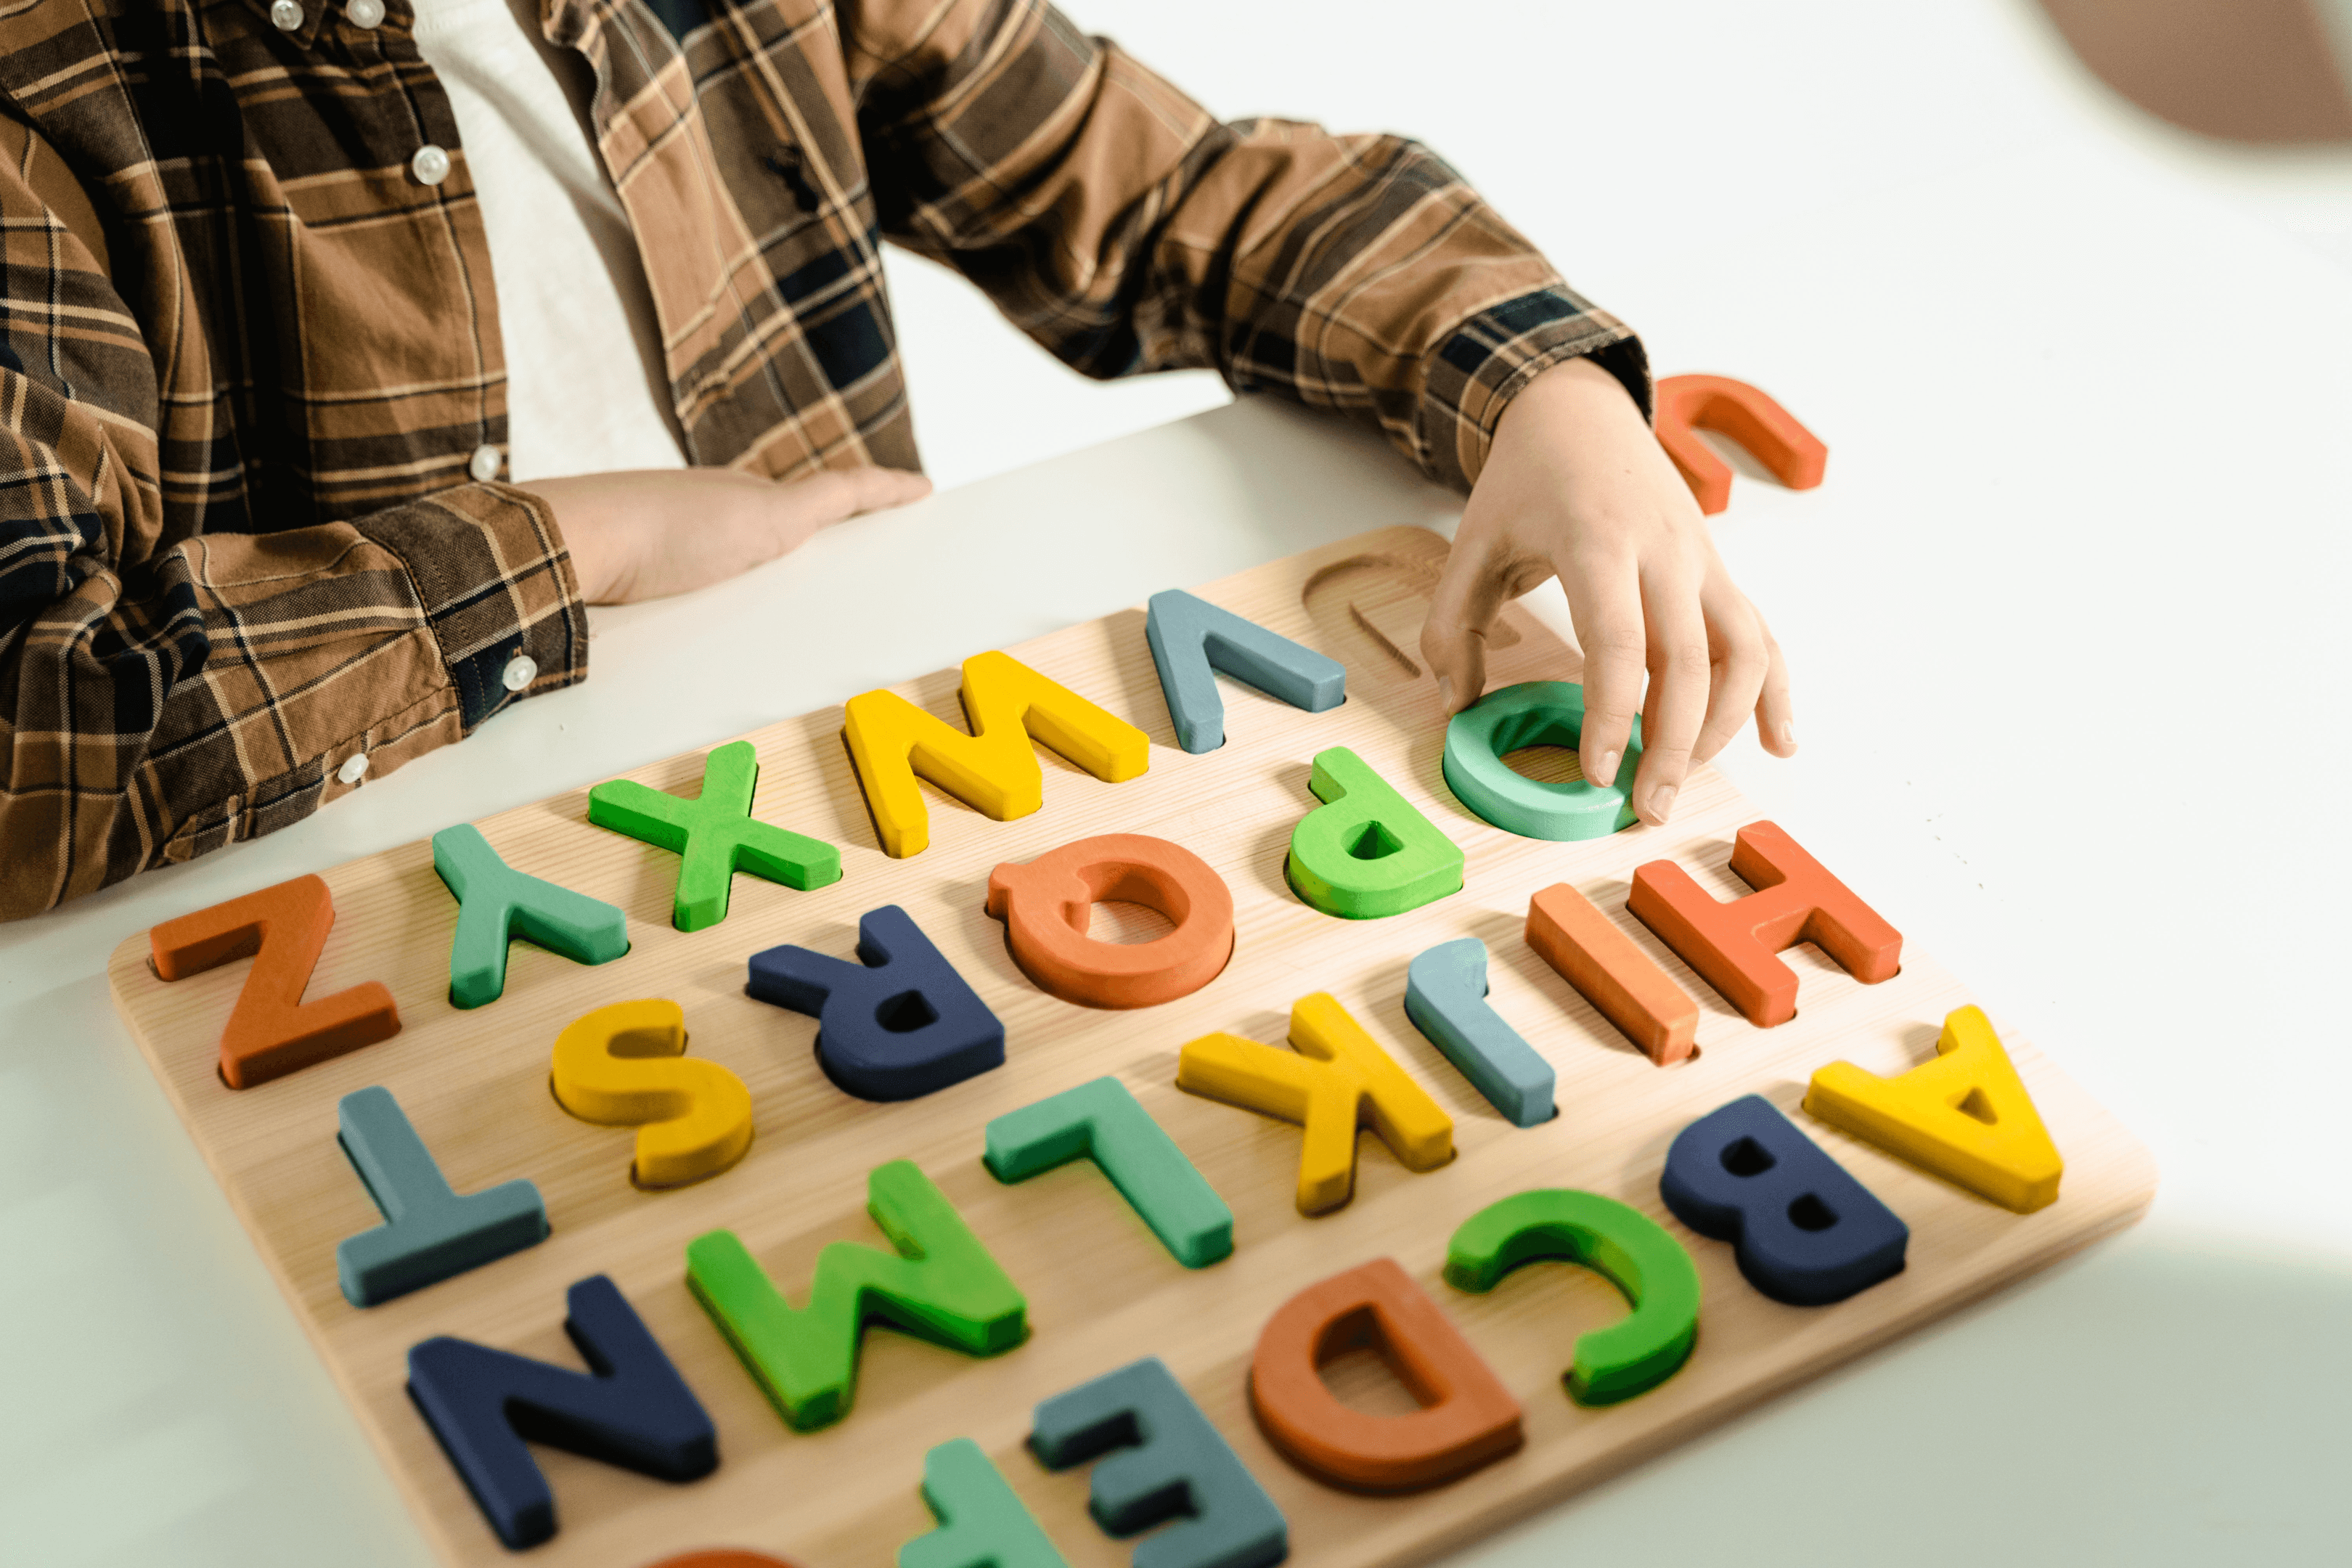  a child playing with an alphabet toy